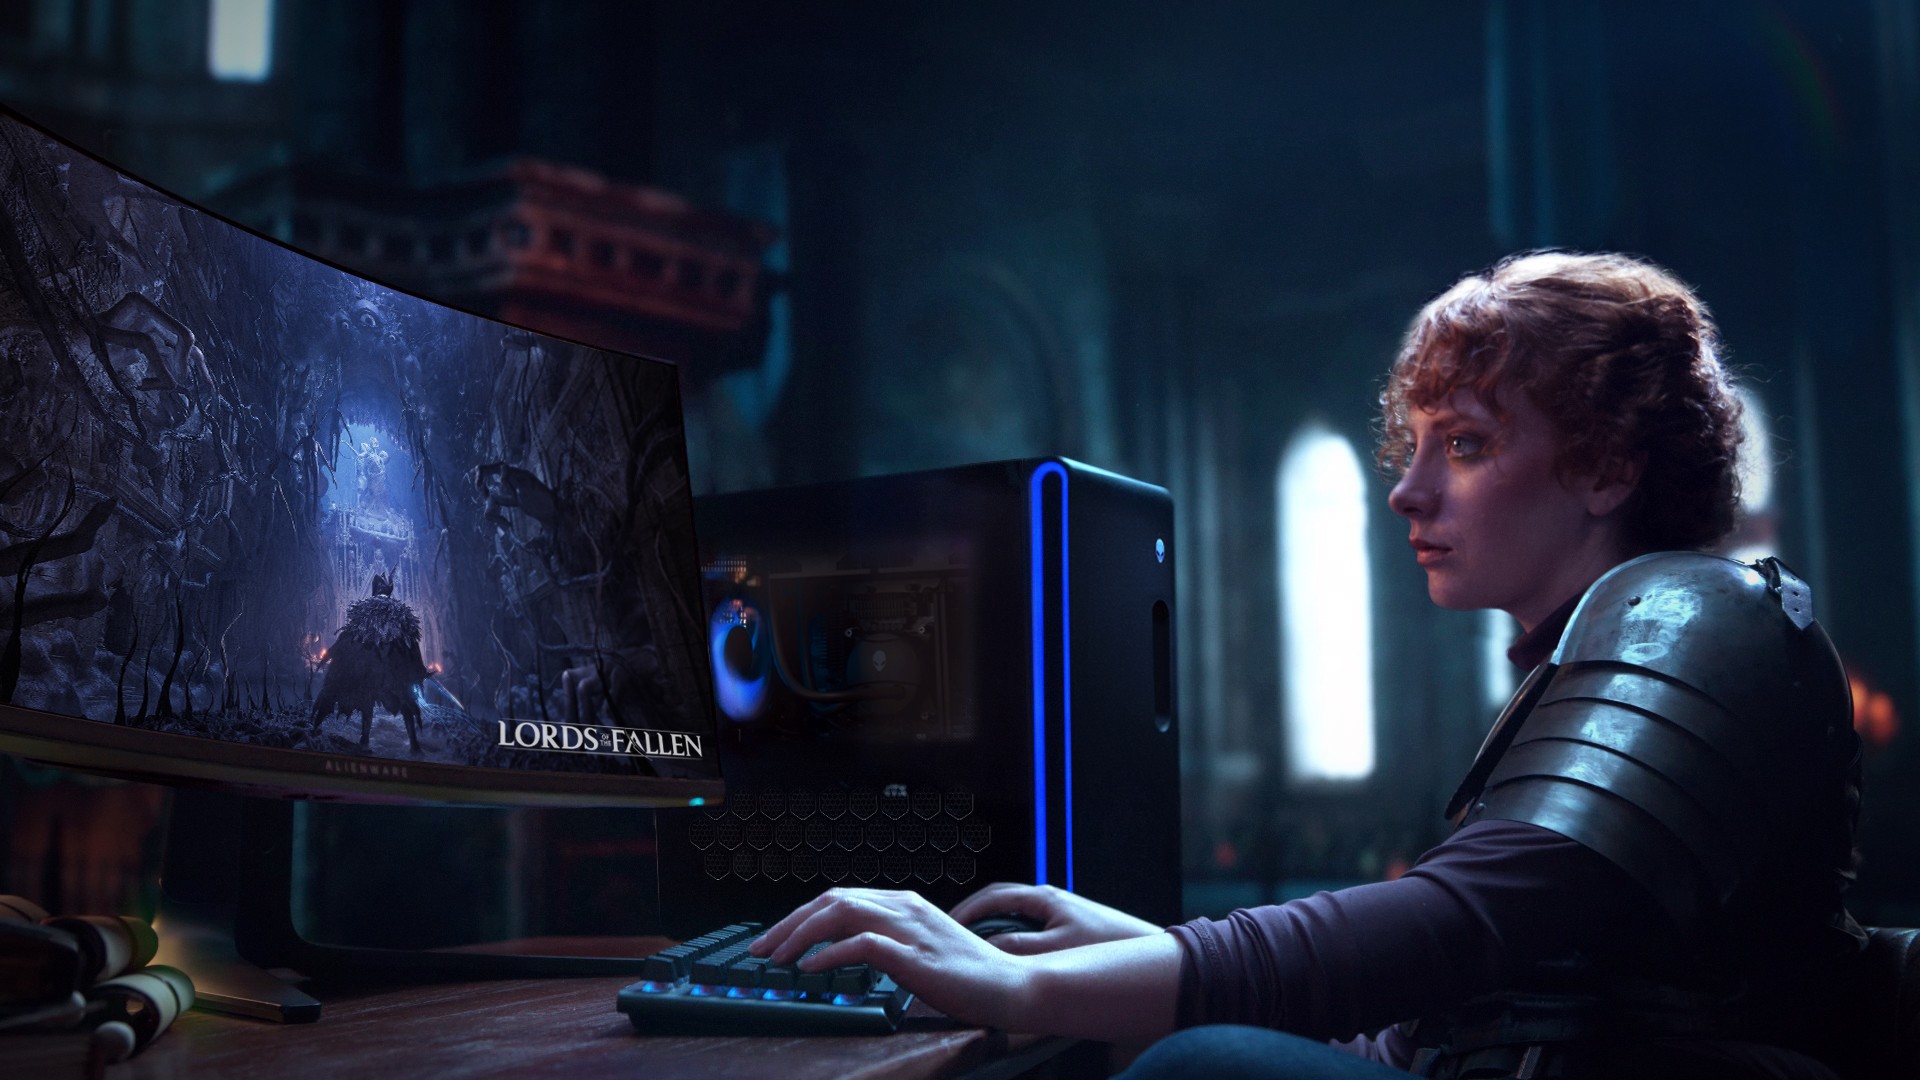 Refined And Streamlined: Meet The New Alienware Aurora